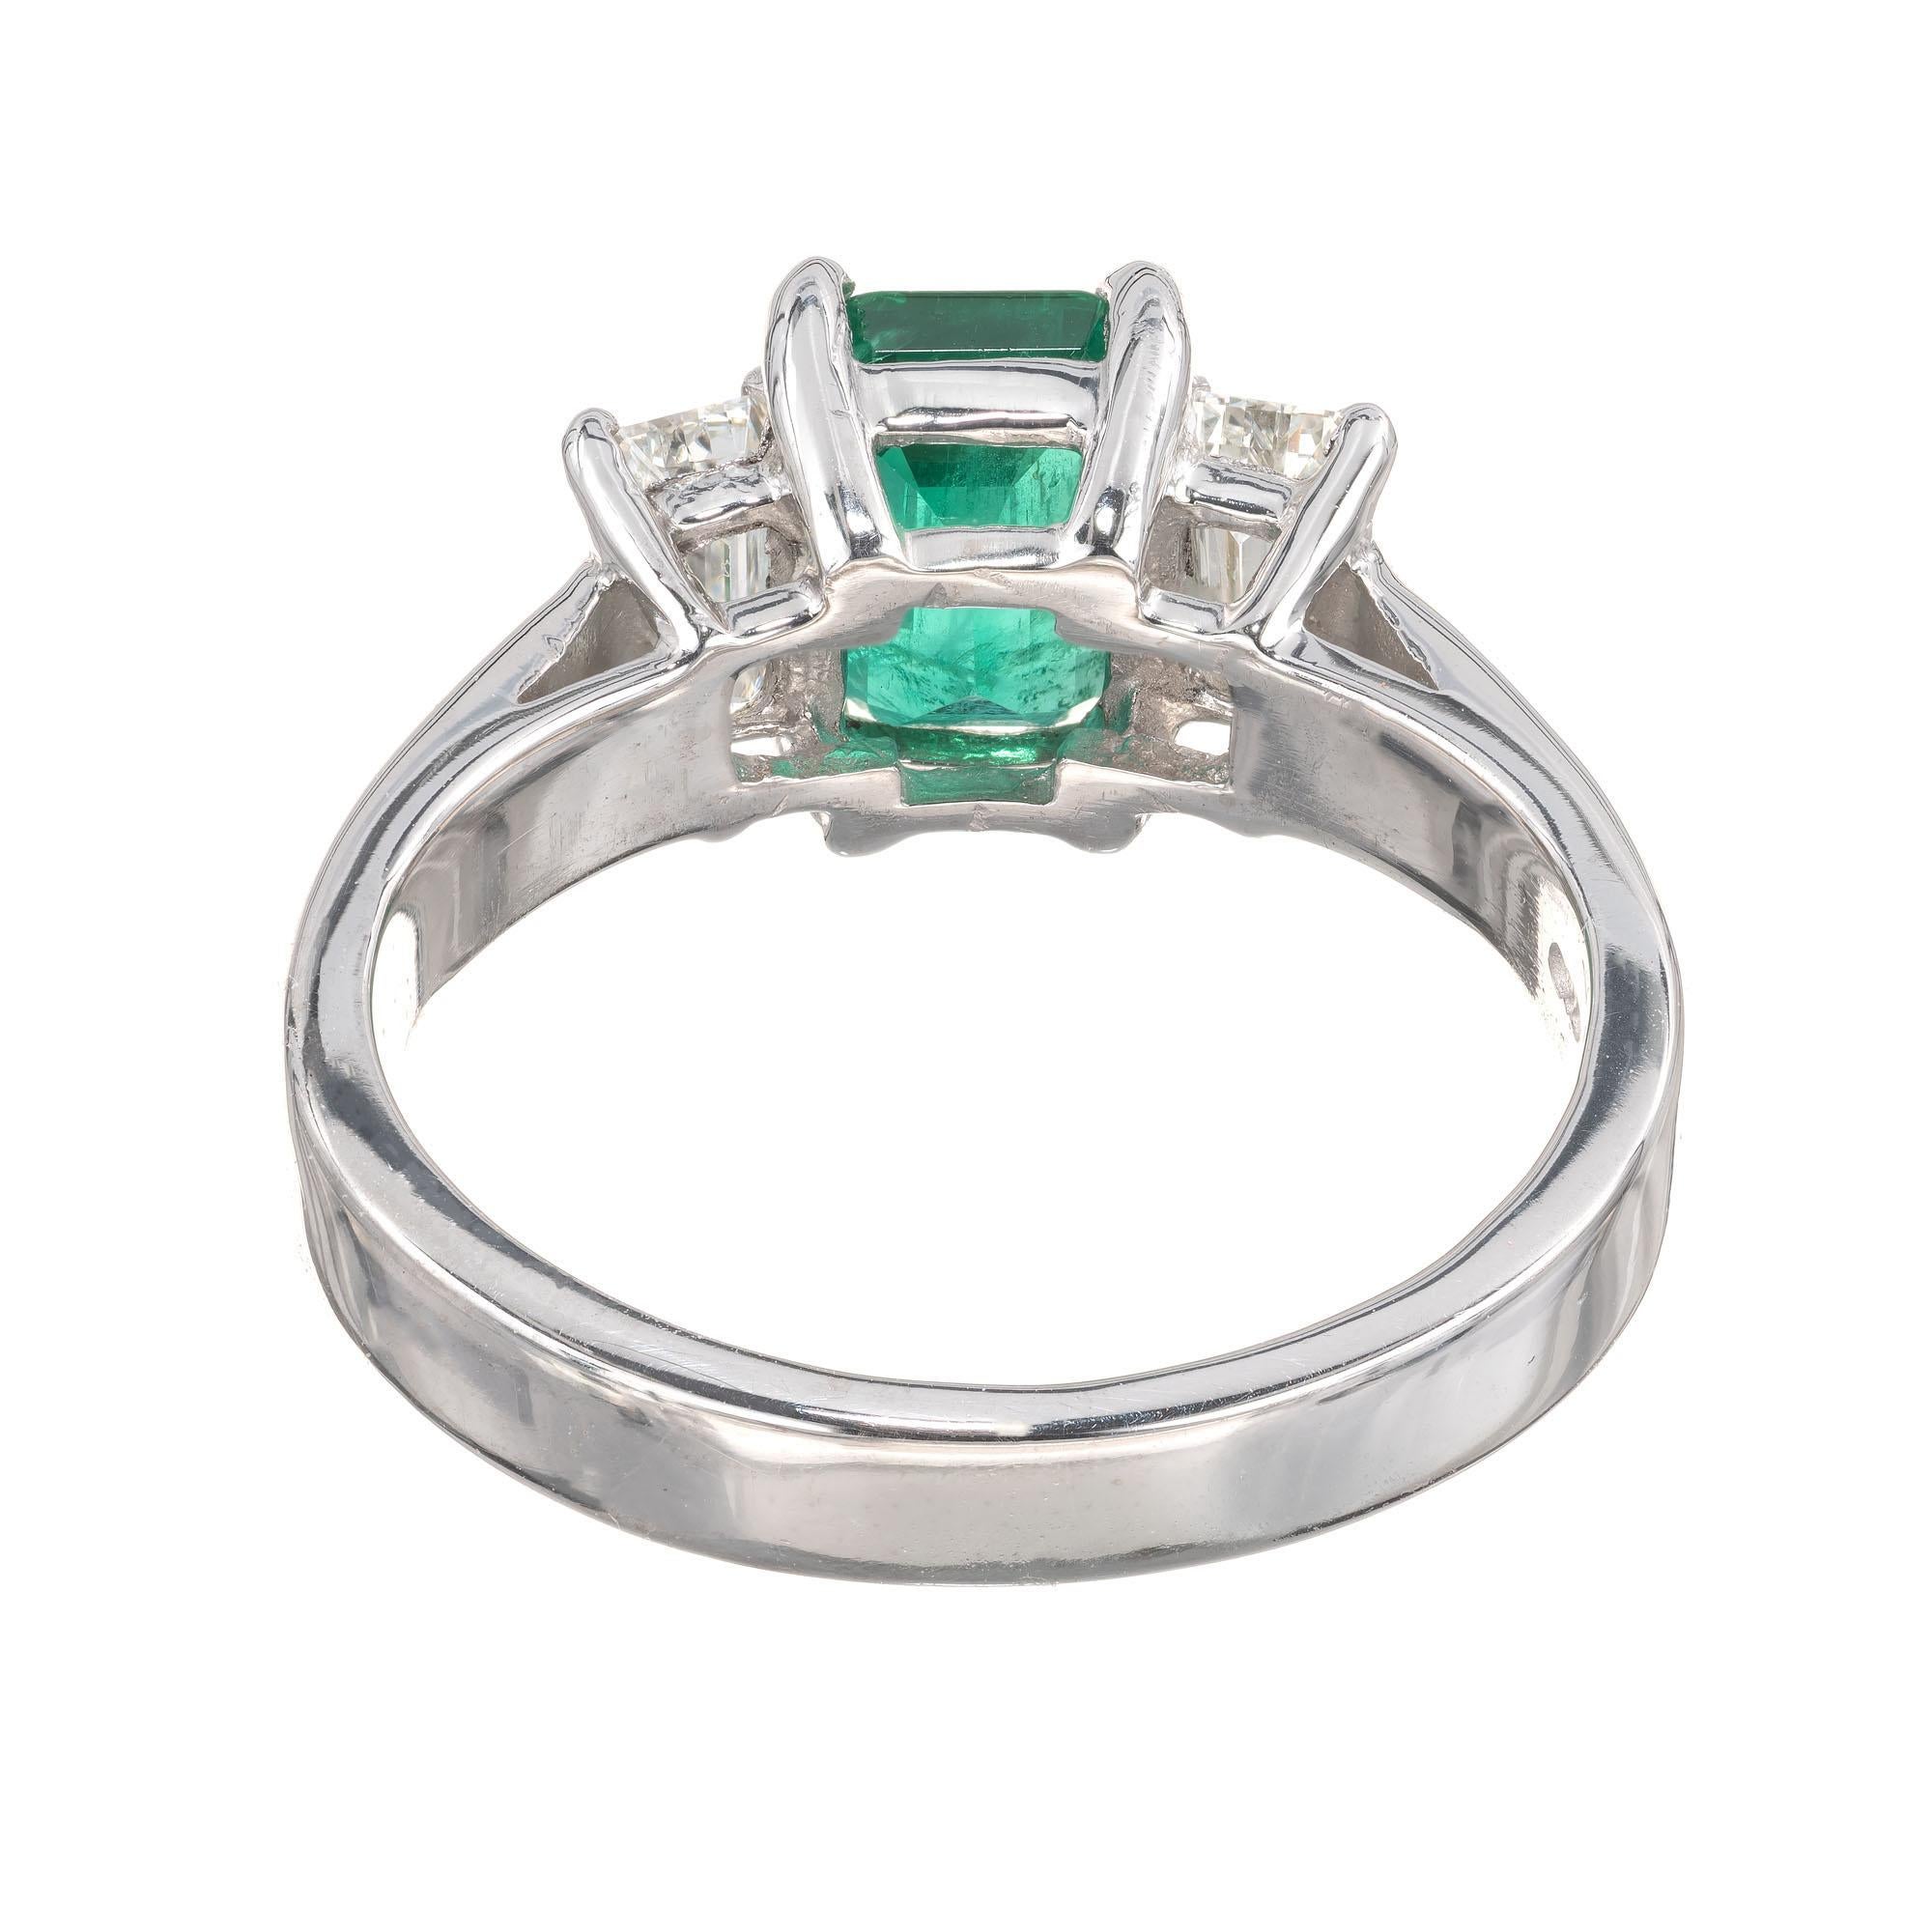 Peter Suchy GIA Certified 1.11 Carat Emerald Diamond Engagement Platinum Ring In New Condition For Sale In Stamford, CT